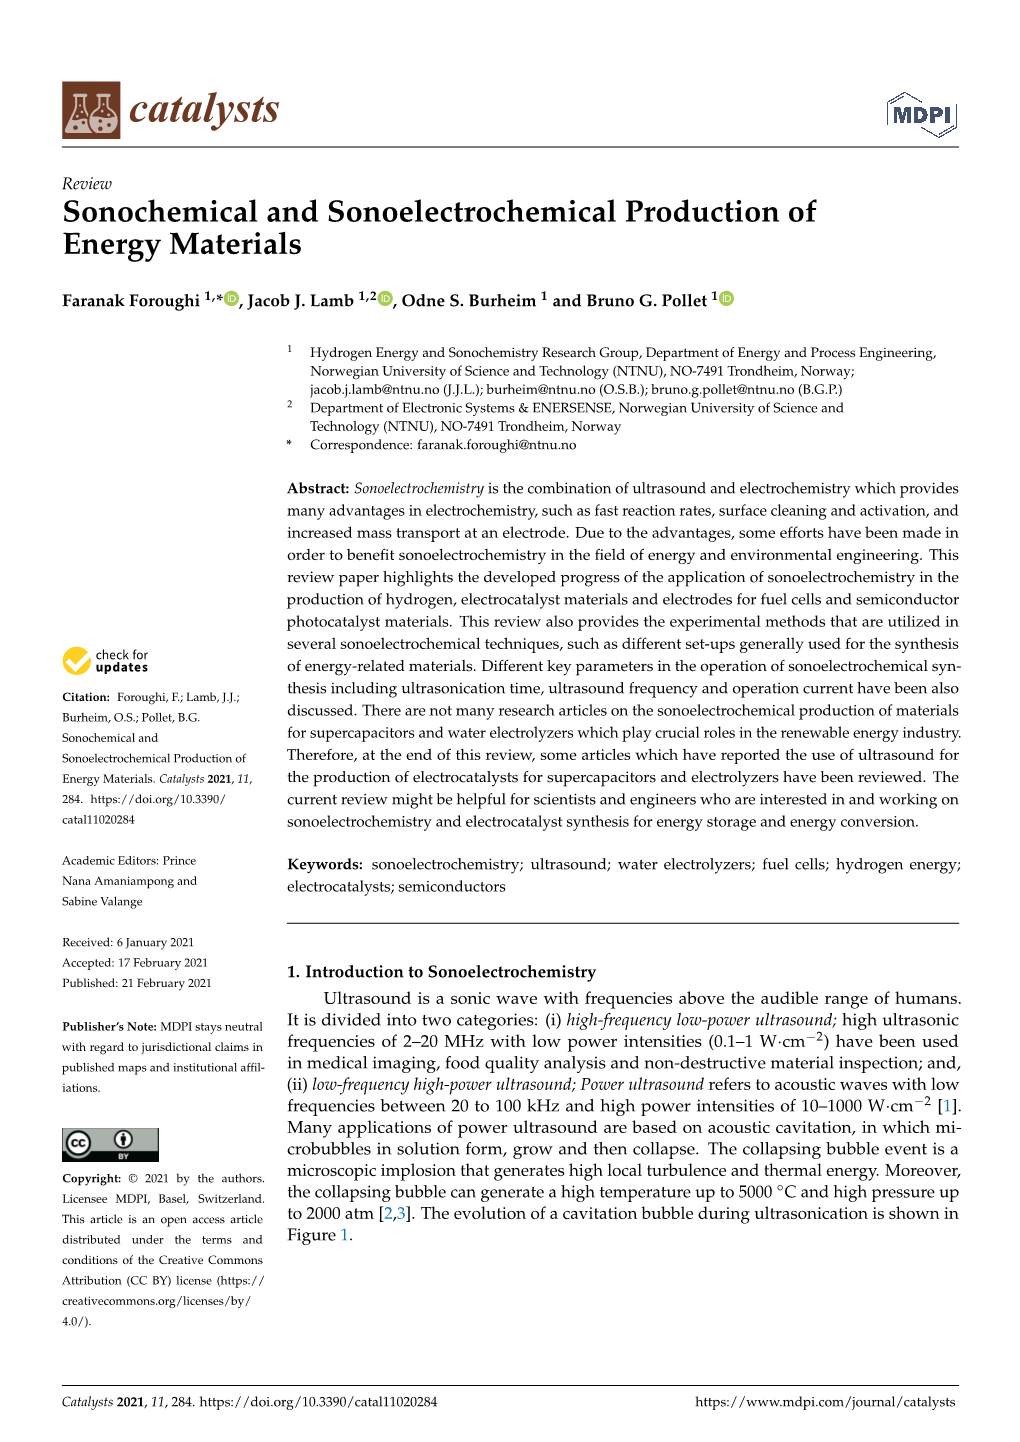 Sonochemical and Sonoelectrochemical Production of Energy Materials